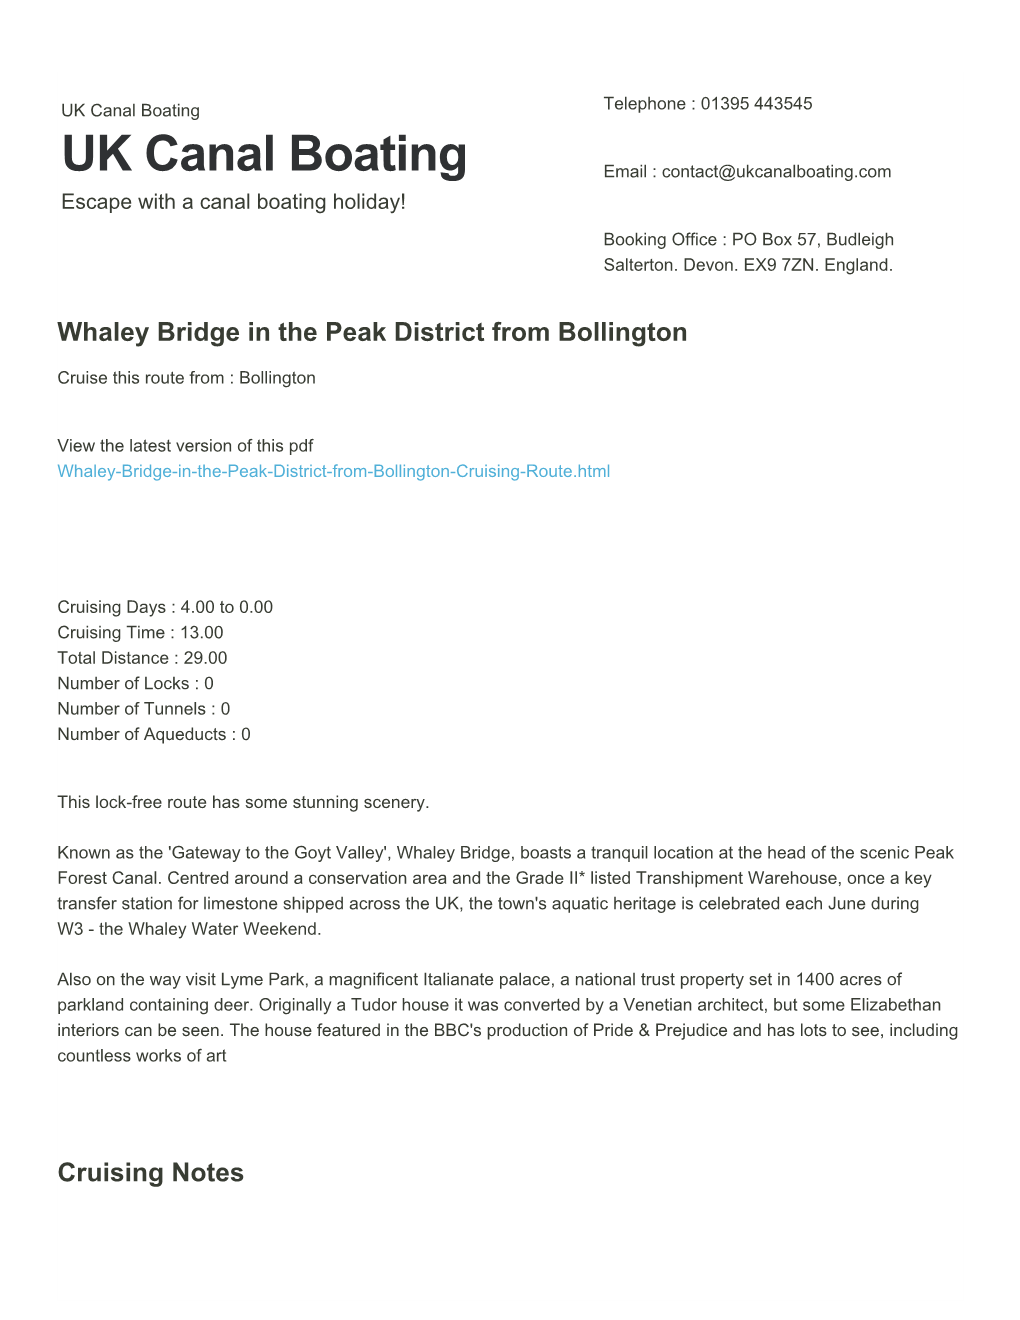 Whaley Bridge in the Peak District from Bollington | UK Canal Boating